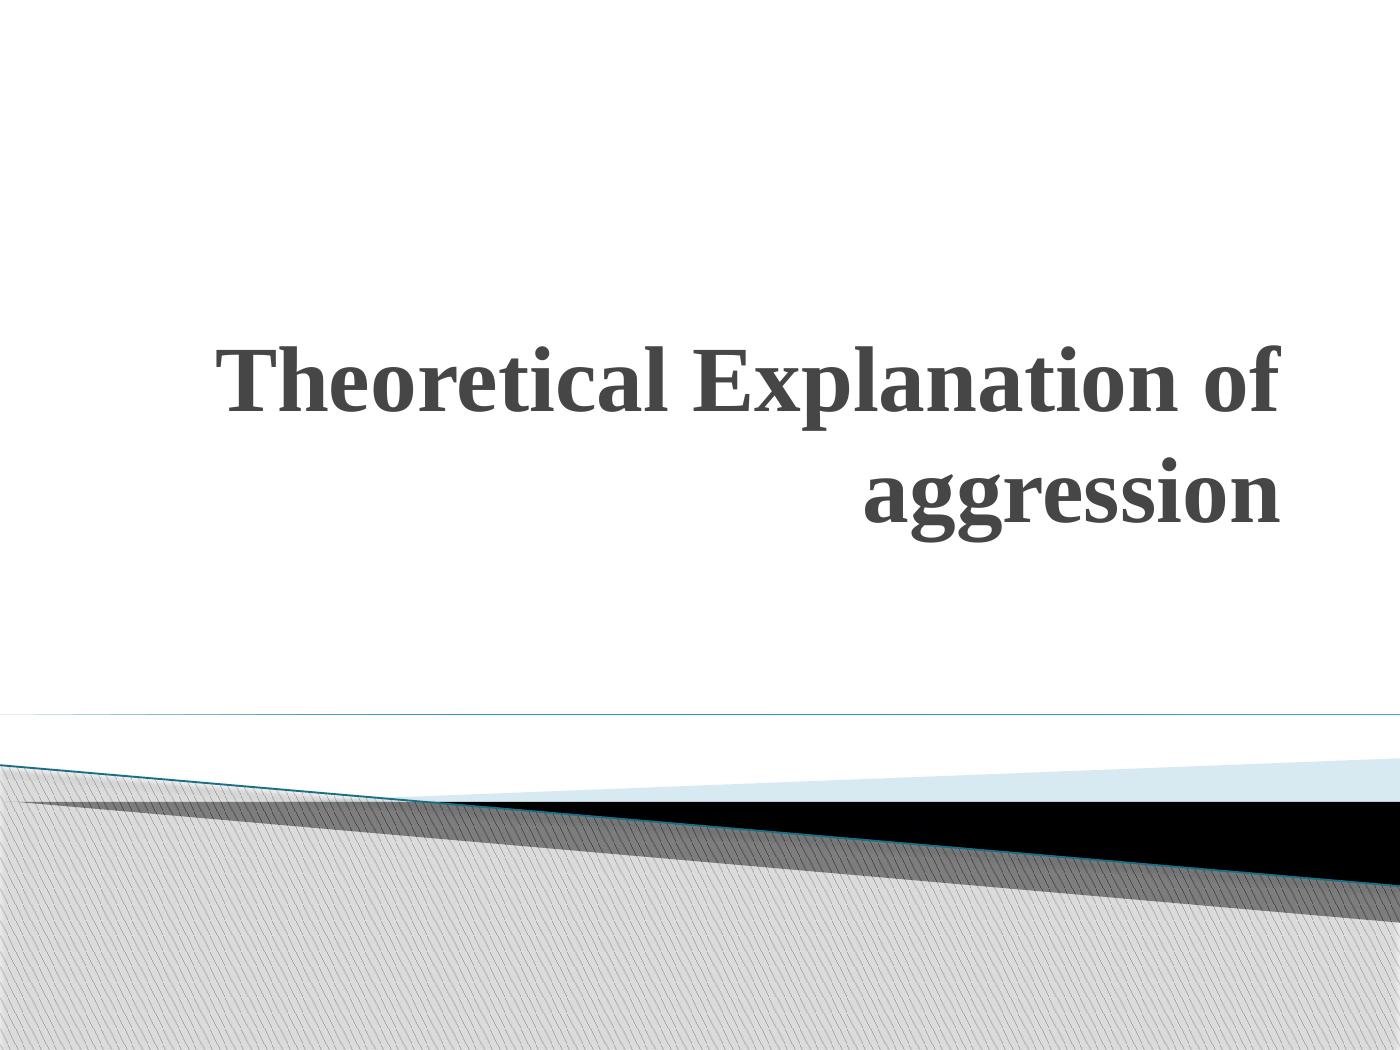 Theoretical Explanation of Aggression_1